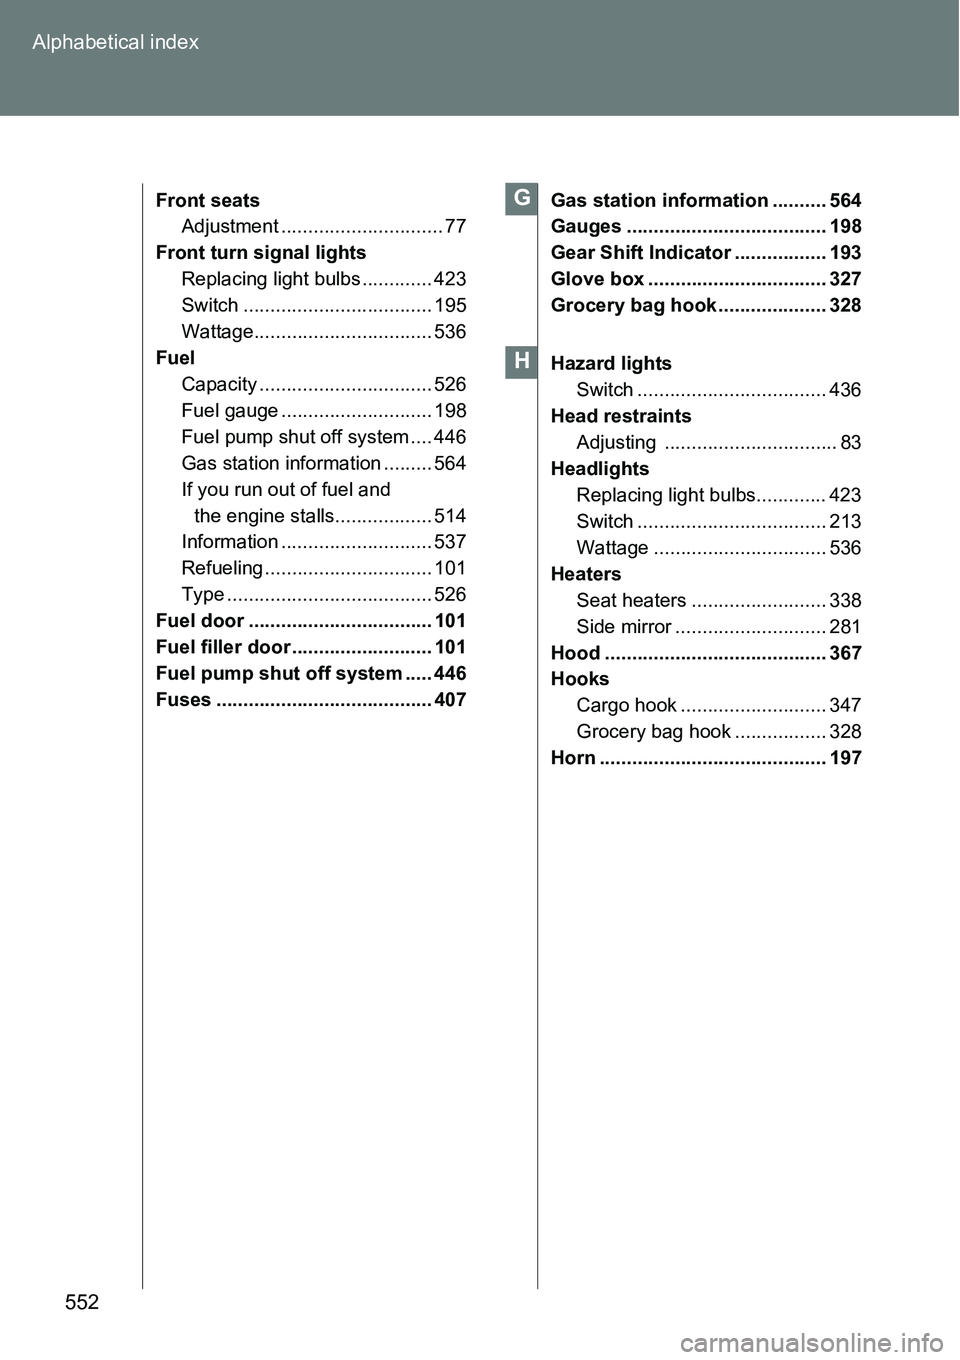 TOYOTA VERSO S 2015  Owners Manual 552 Alphabetical index
Front seats
Adjustment .............................. 77
Front turn signal lights
Replacing light bulbs ............. 423
Switch ................................... 195
Wattage.